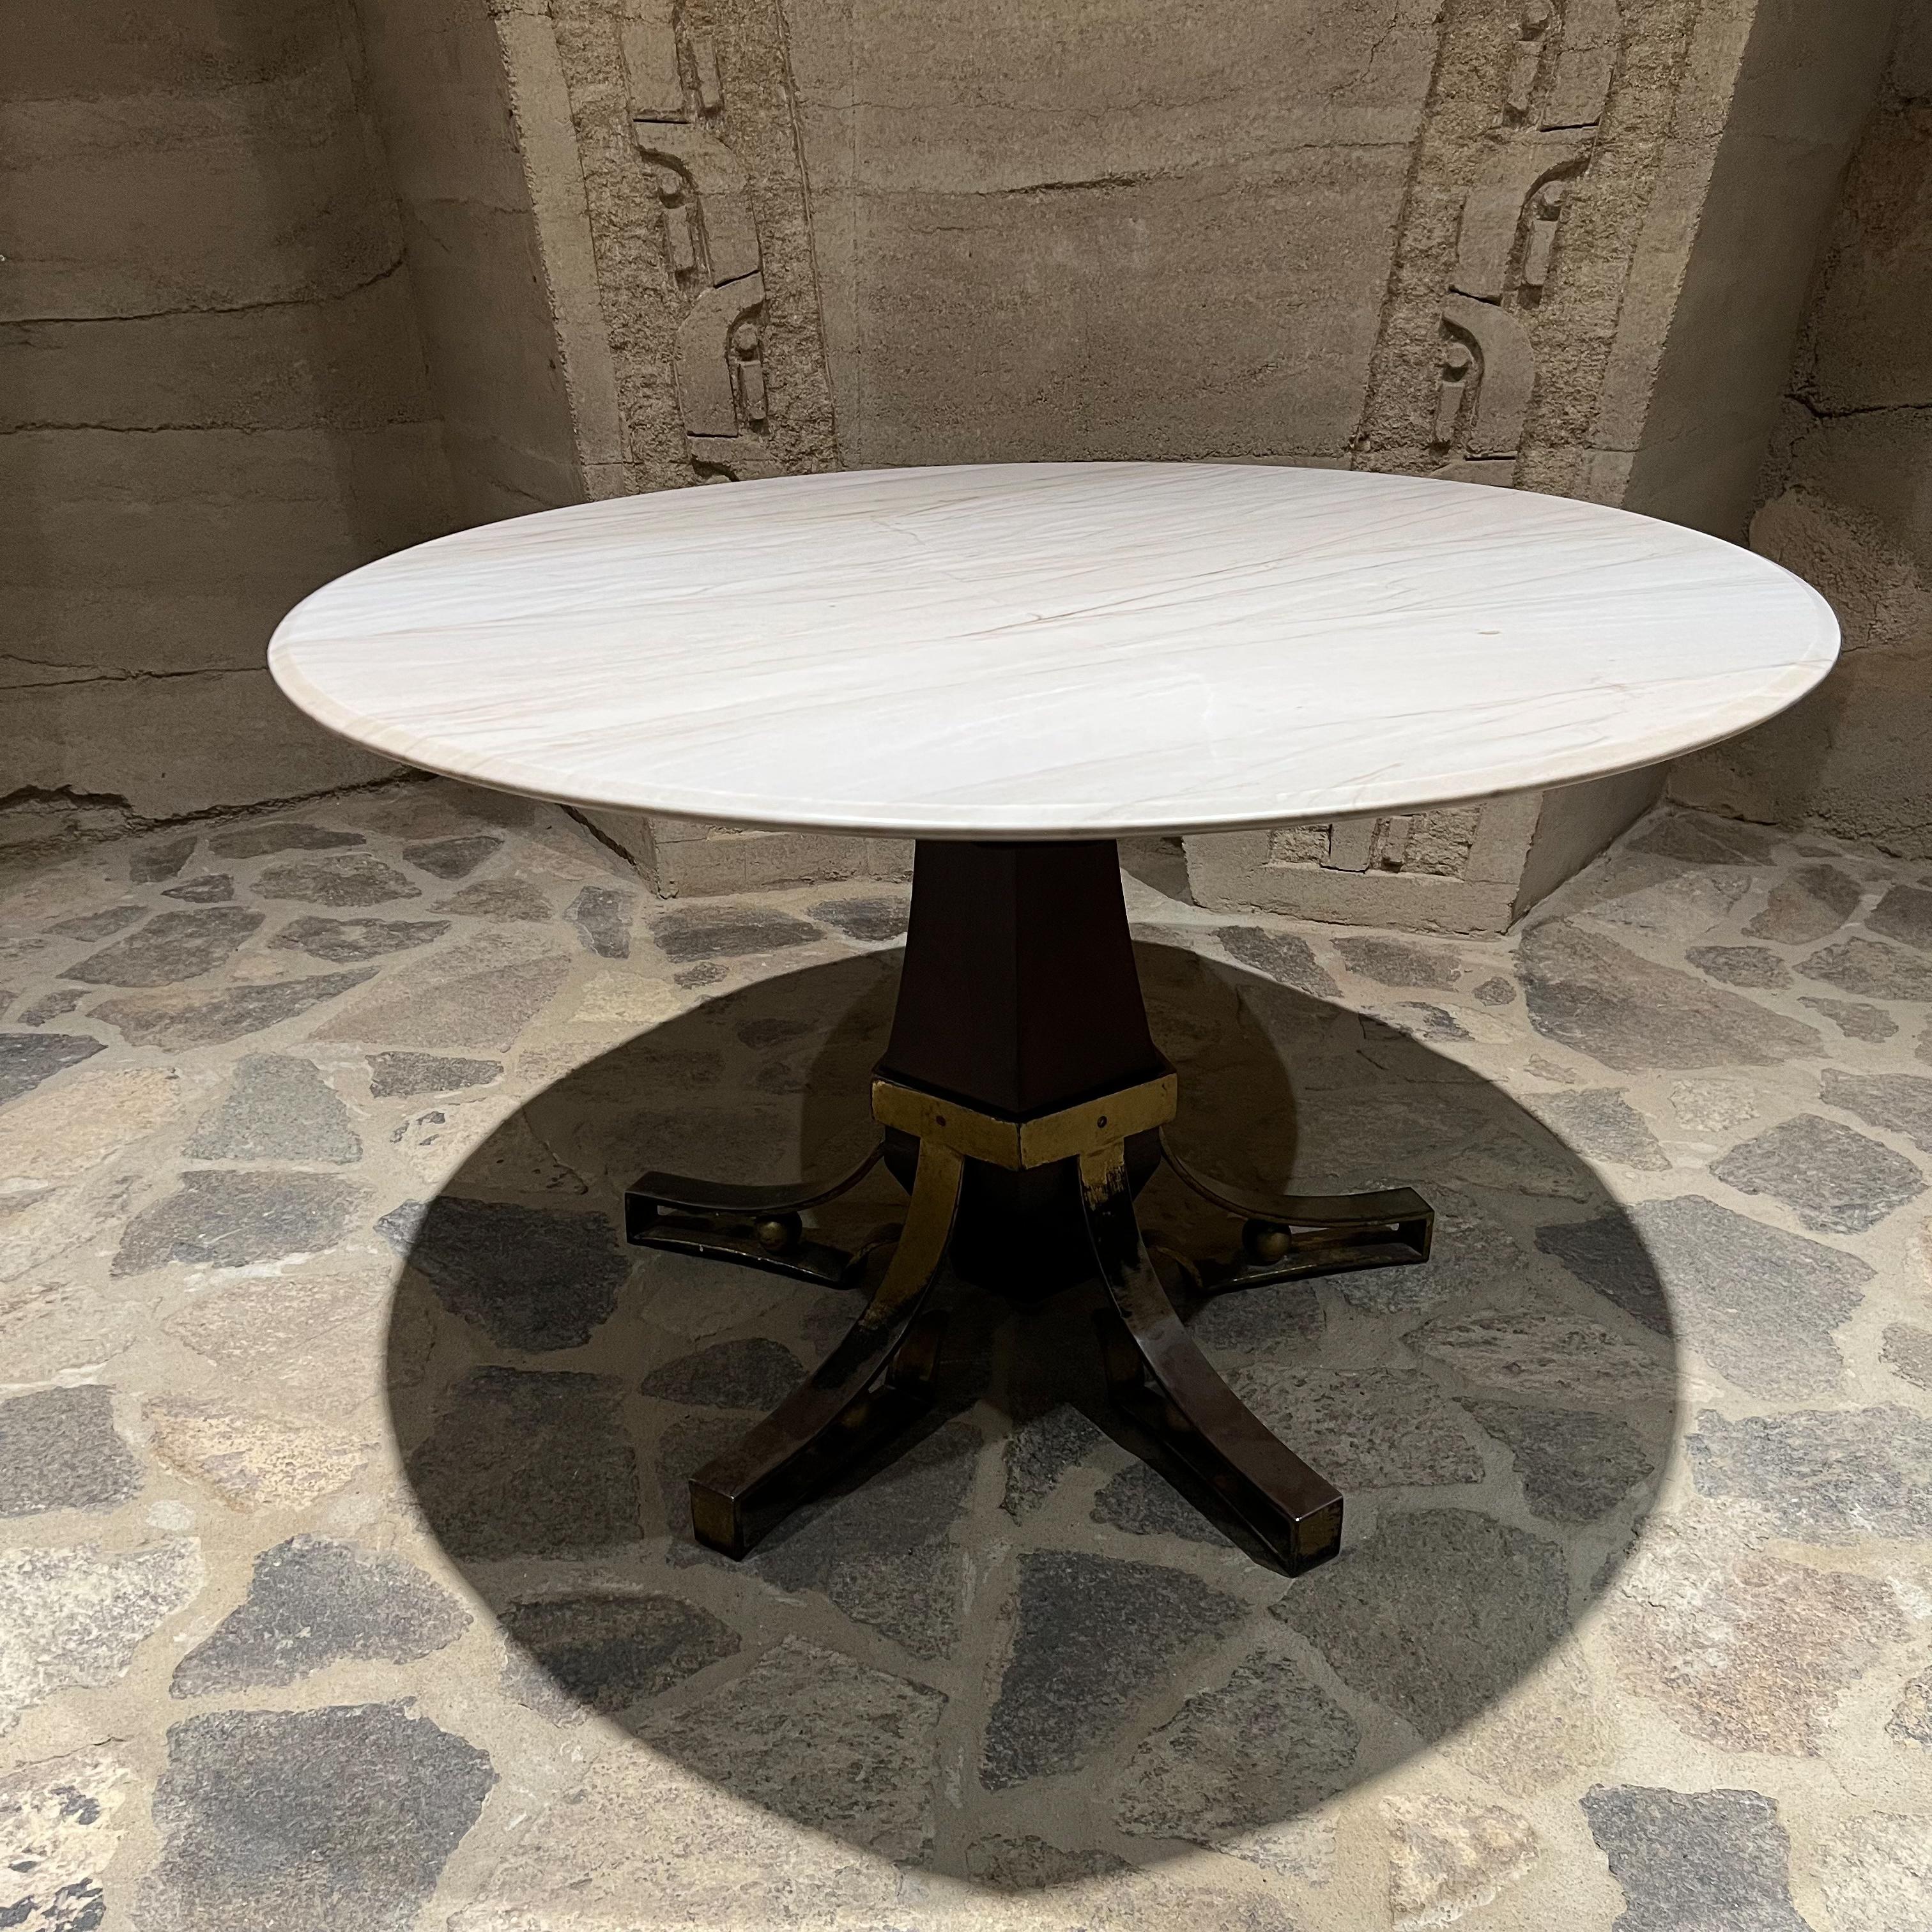 Modernist Dining Table in White Marble Sculptural Base Arturo Pani Mexico City For Sale 3